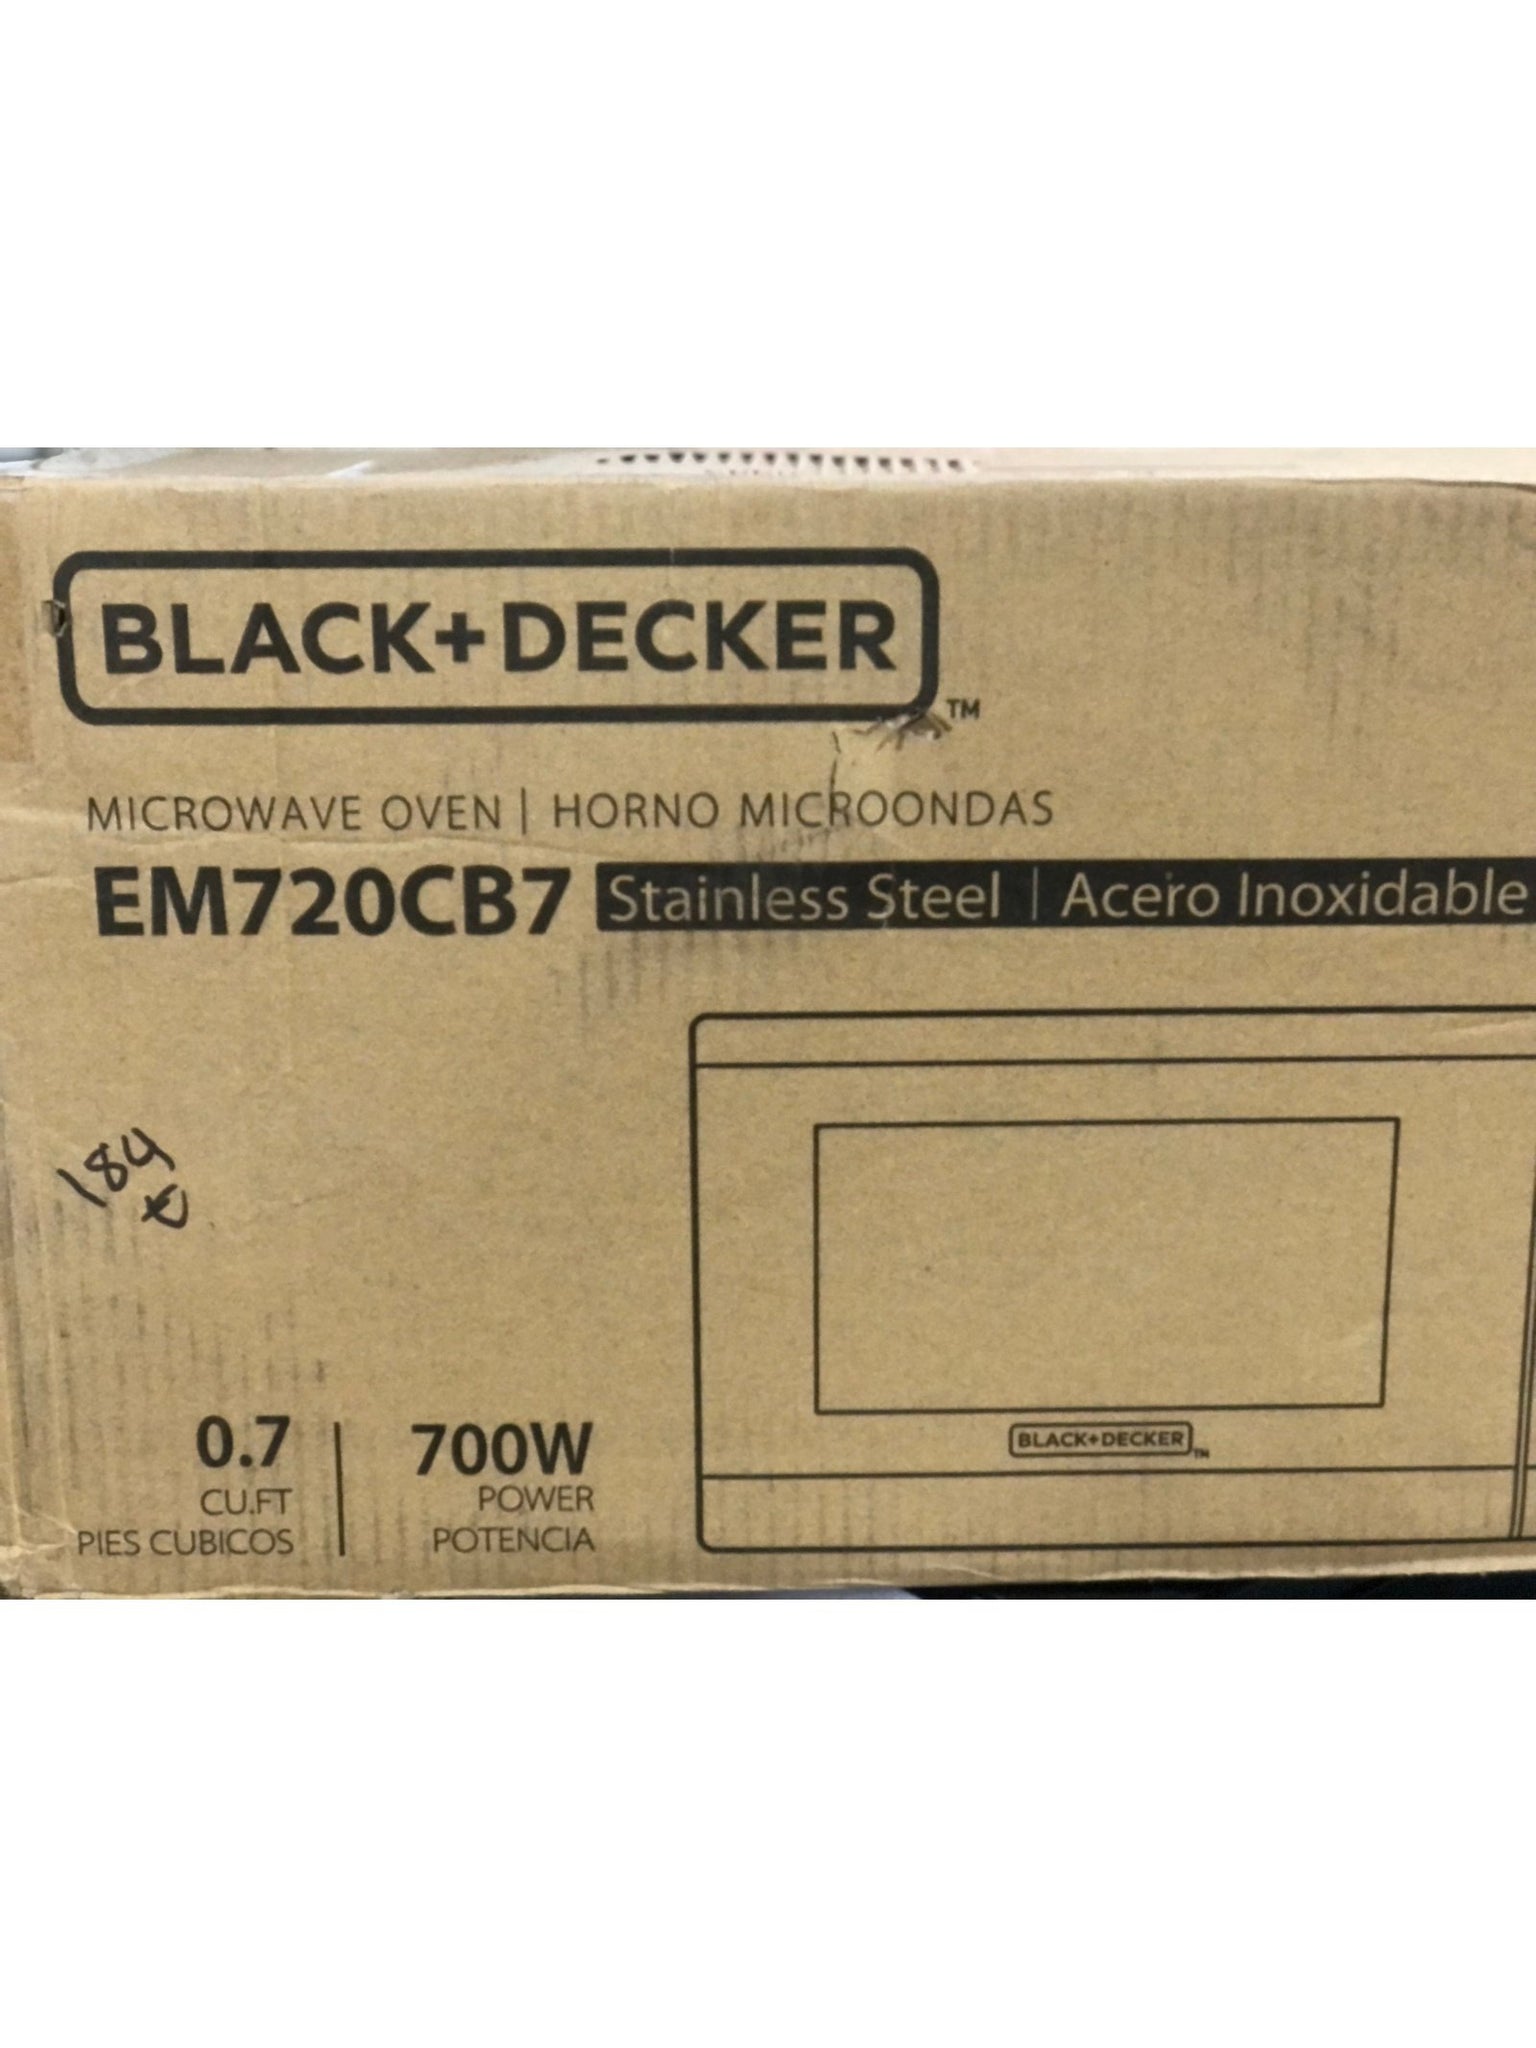 BLACK+DECKER EM720CB7 Digital Microwave Oven with Turntable Push-Button Door, Child Safety Lock, 700W, Stainless Steel, 0.7 Cu.ft